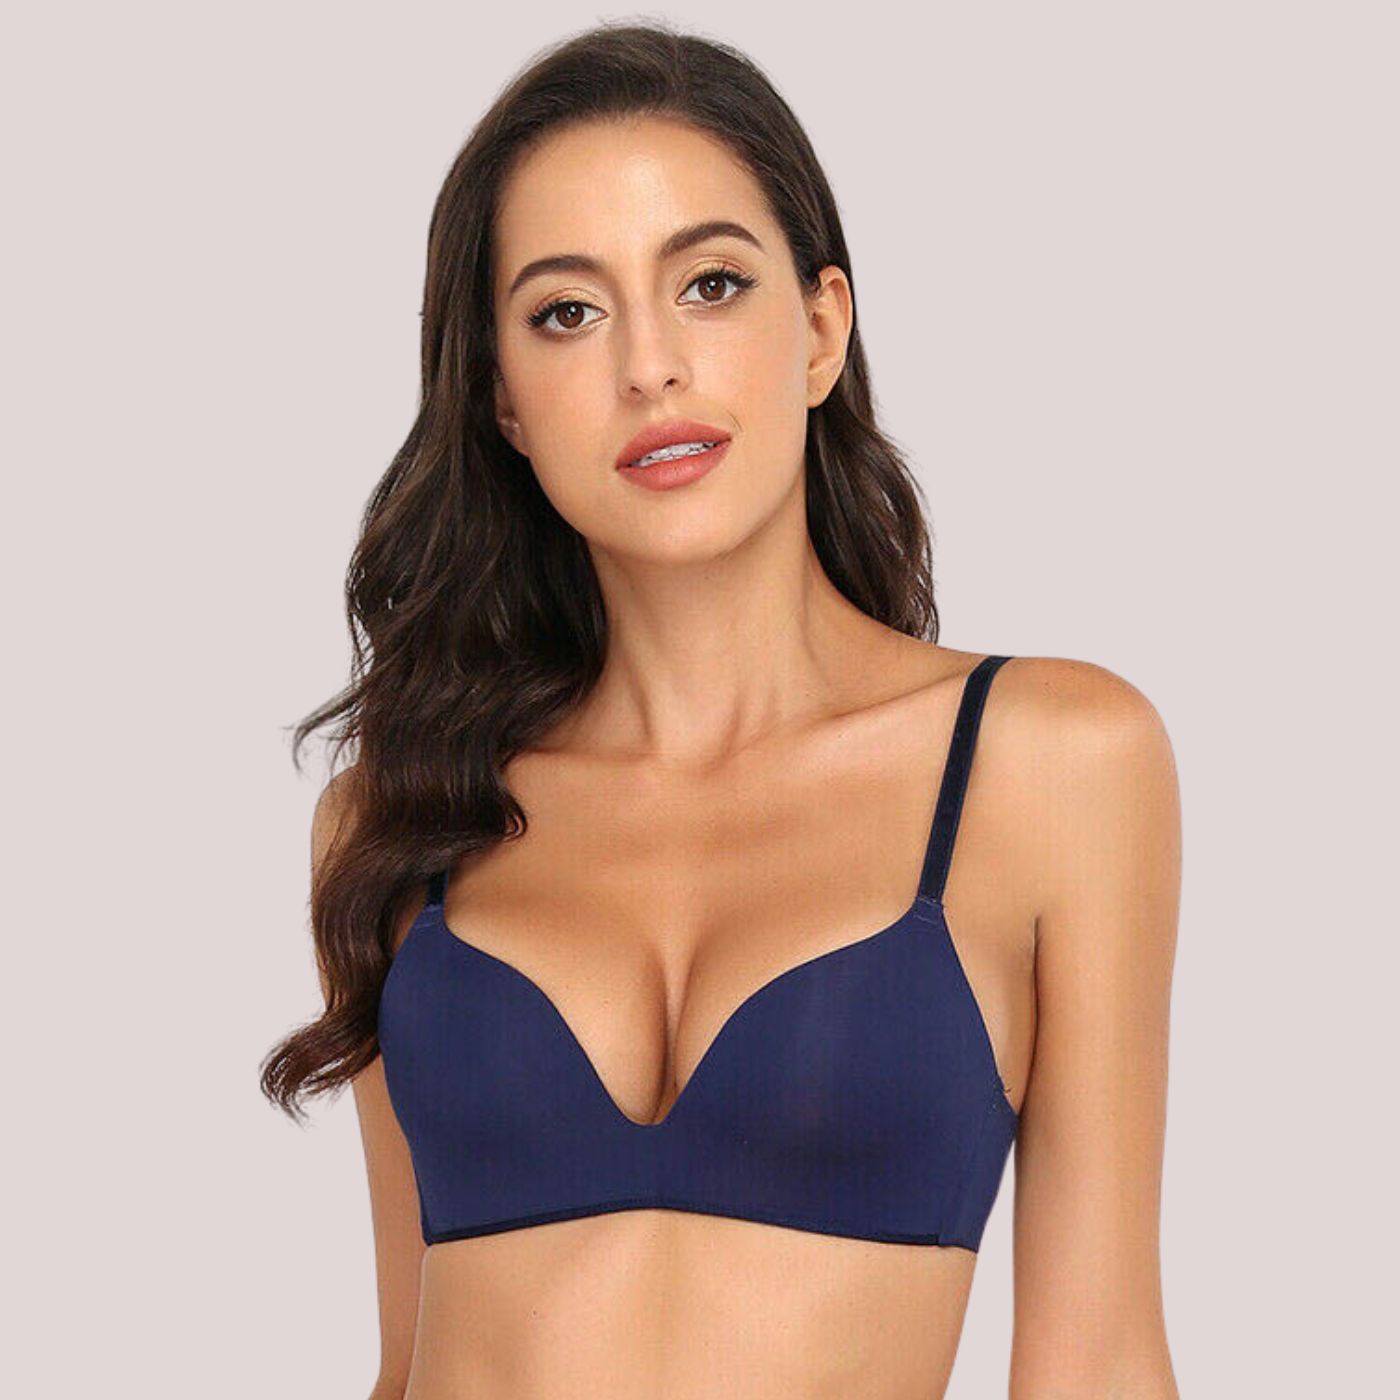 Push up bra - Best dropshipping product for international market